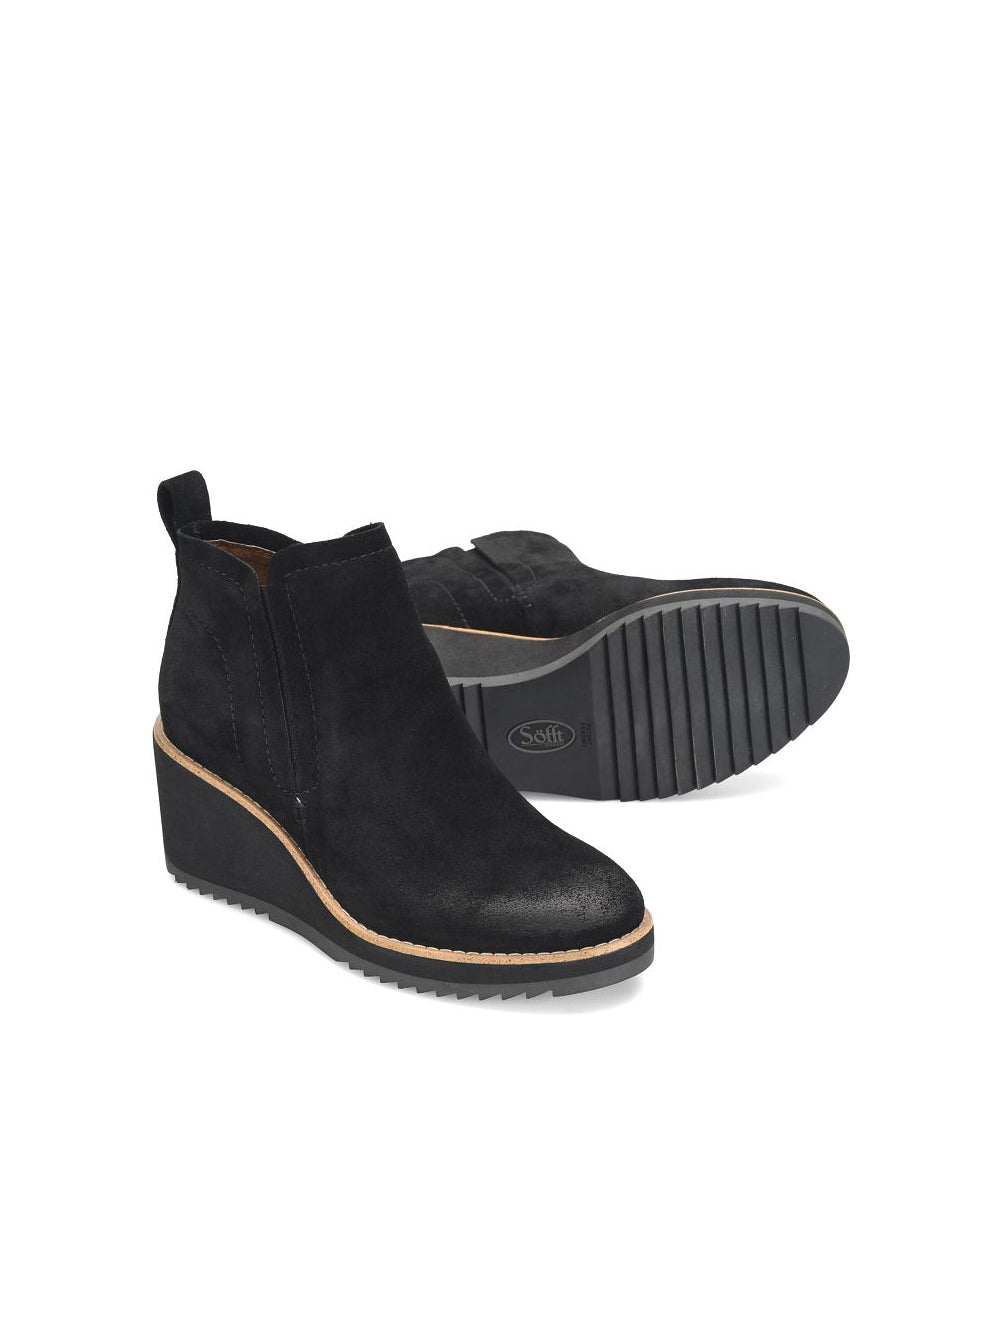 sofft shoes emeree wedge chelsea ankle boot in black suede